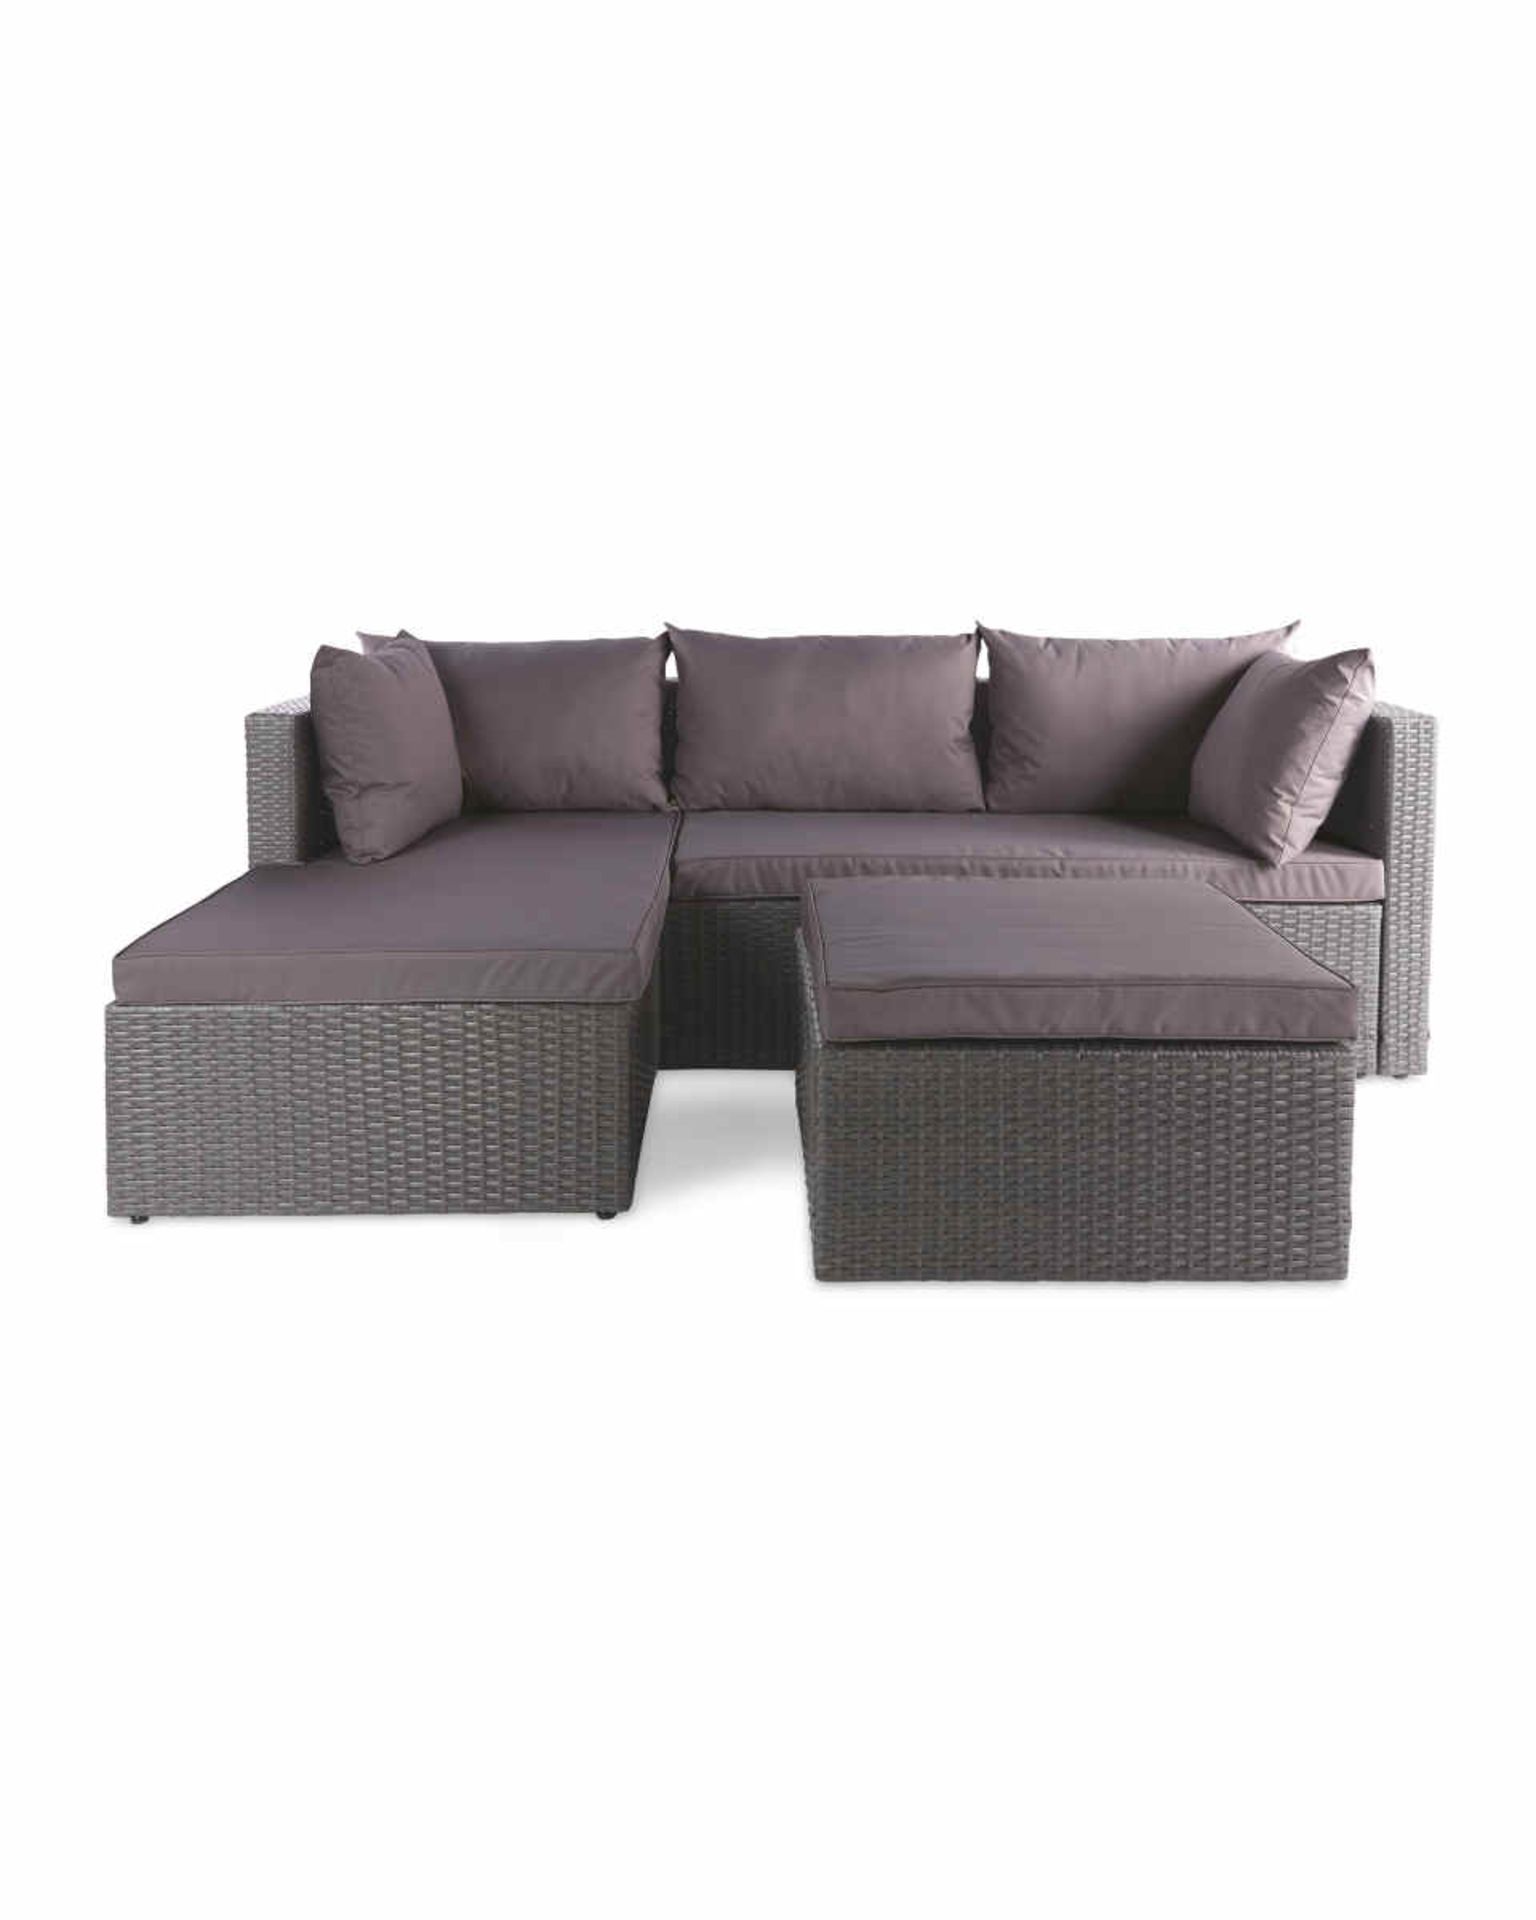 Anthracite Corner Sofa & Cover. Soak in the sun and feel that summer breeze while sitting on your - Image 2 of 4